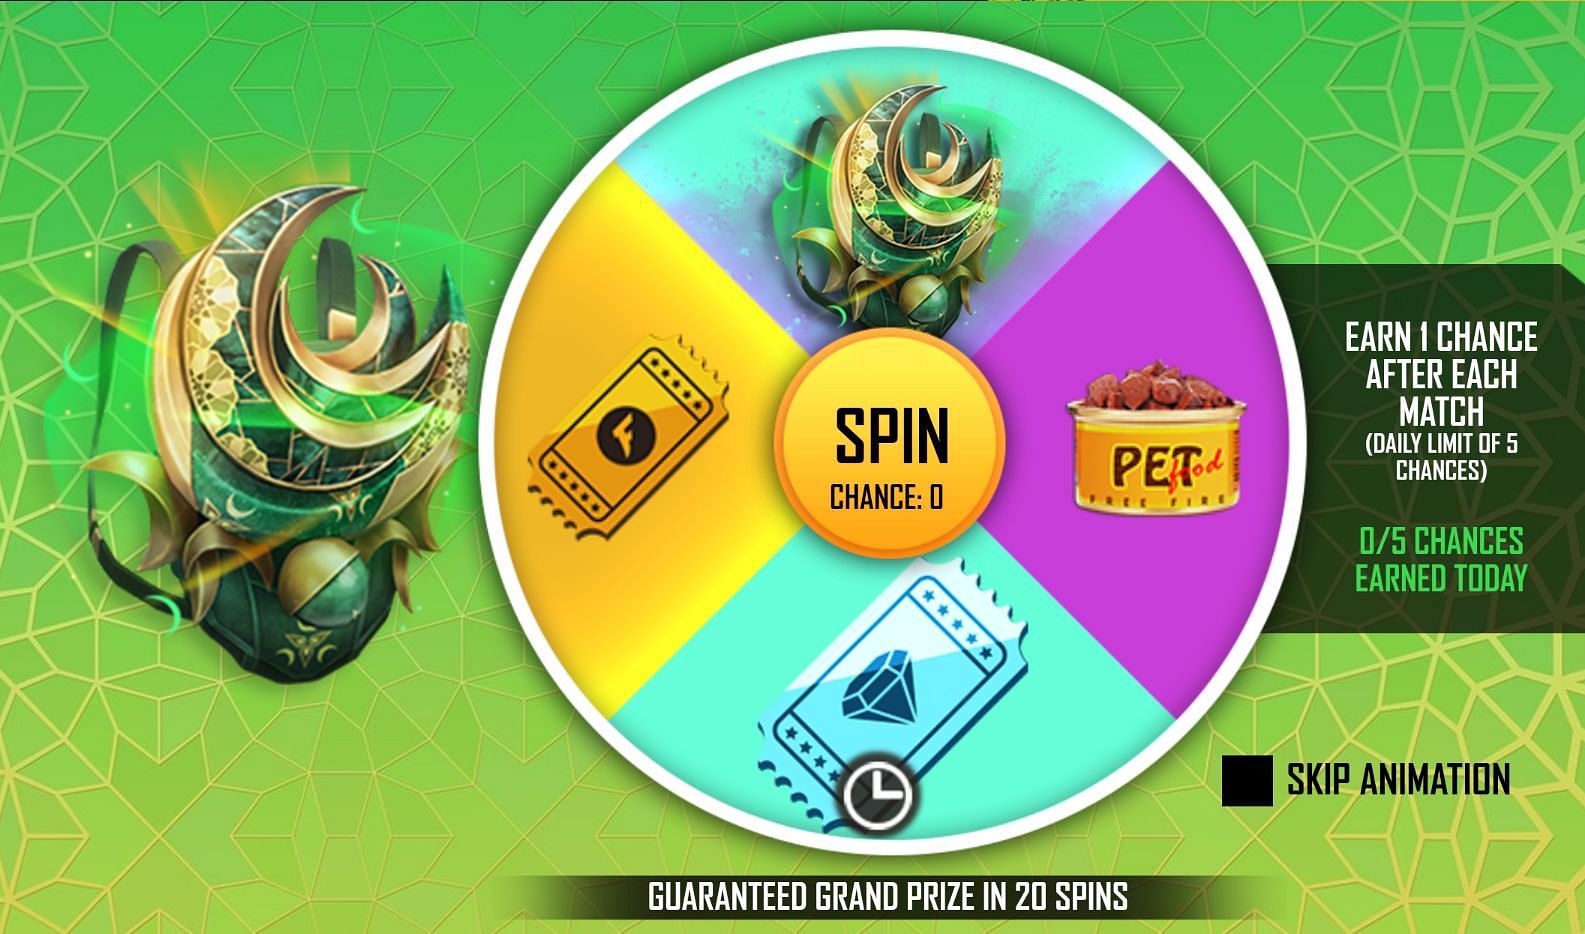 Players are guaranteed the rewards in 20 spins (Image via Garena)